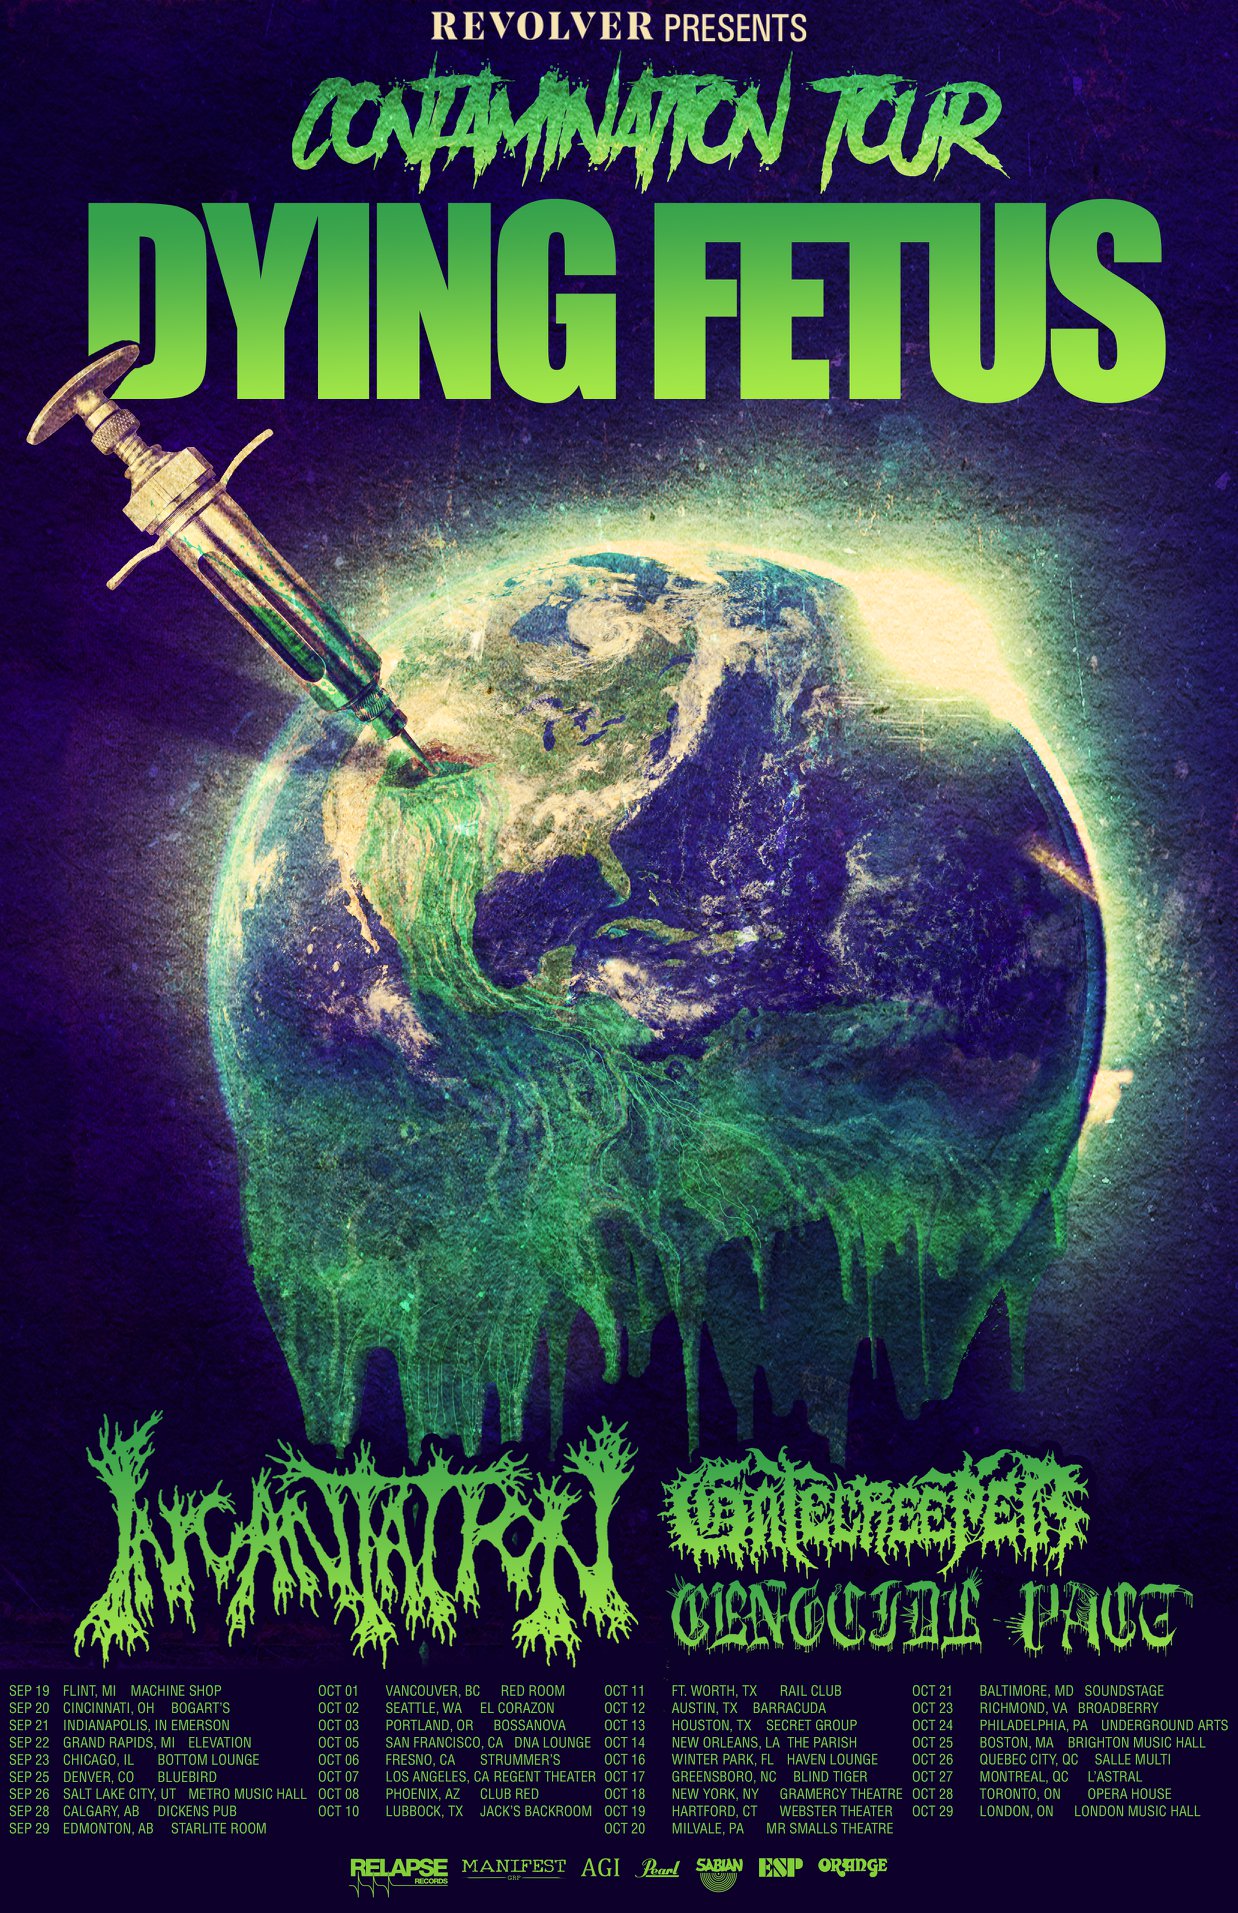 Dying Fetus, Incantation, Gatecreeper, and Genocide Pact booked for